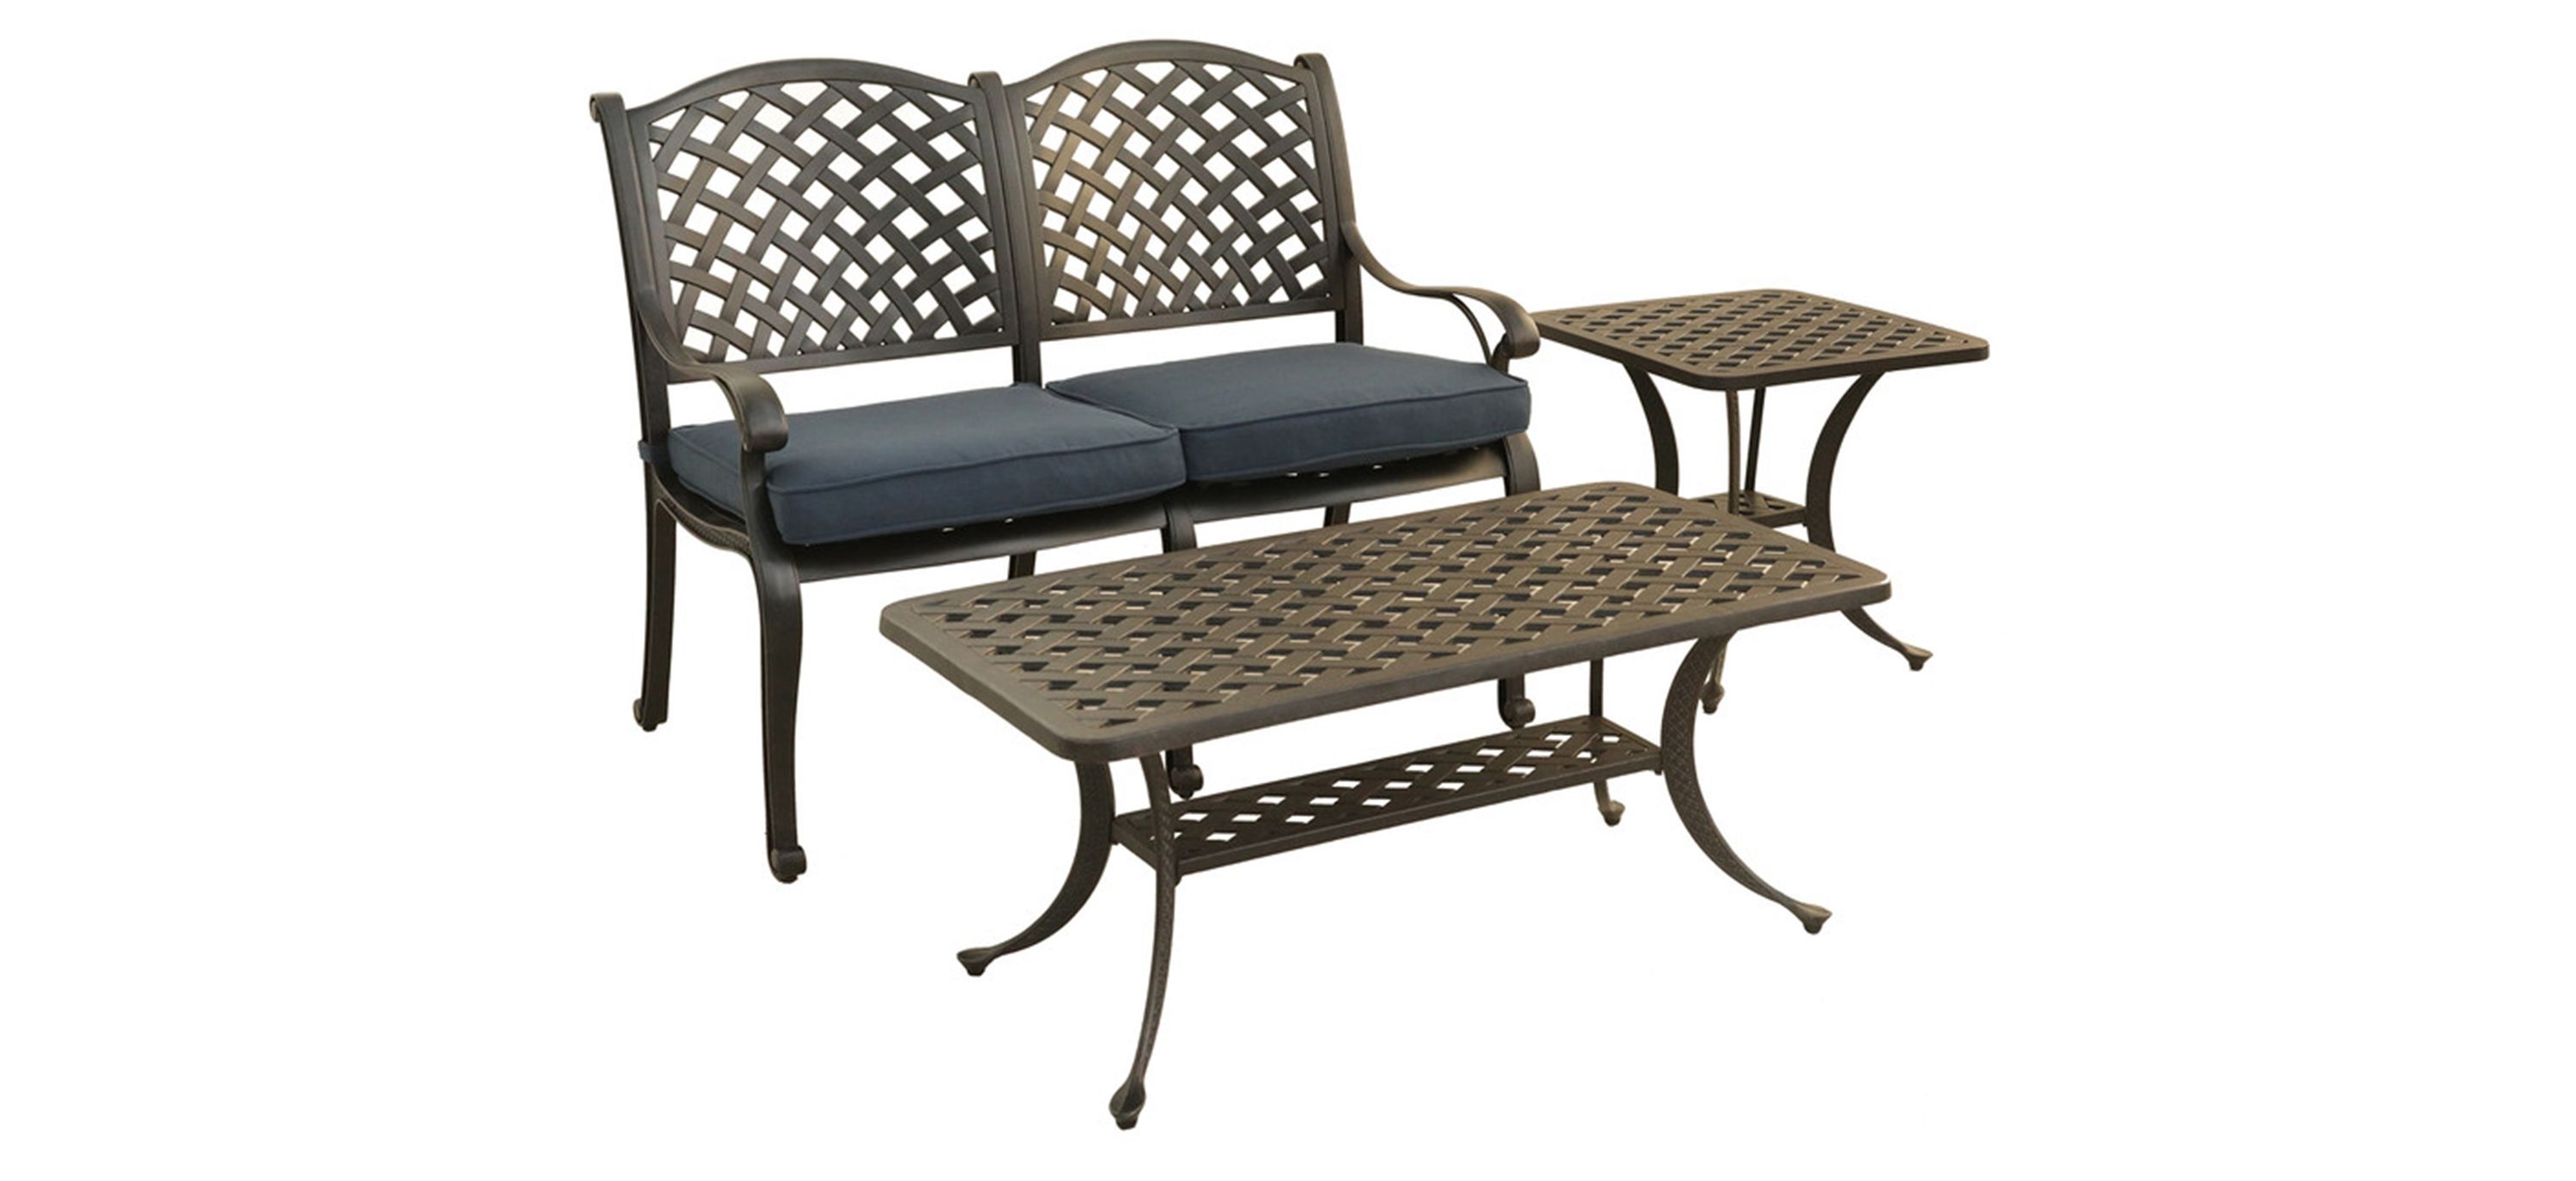 Castle Rock Outdoor 3-pc. Seating Set